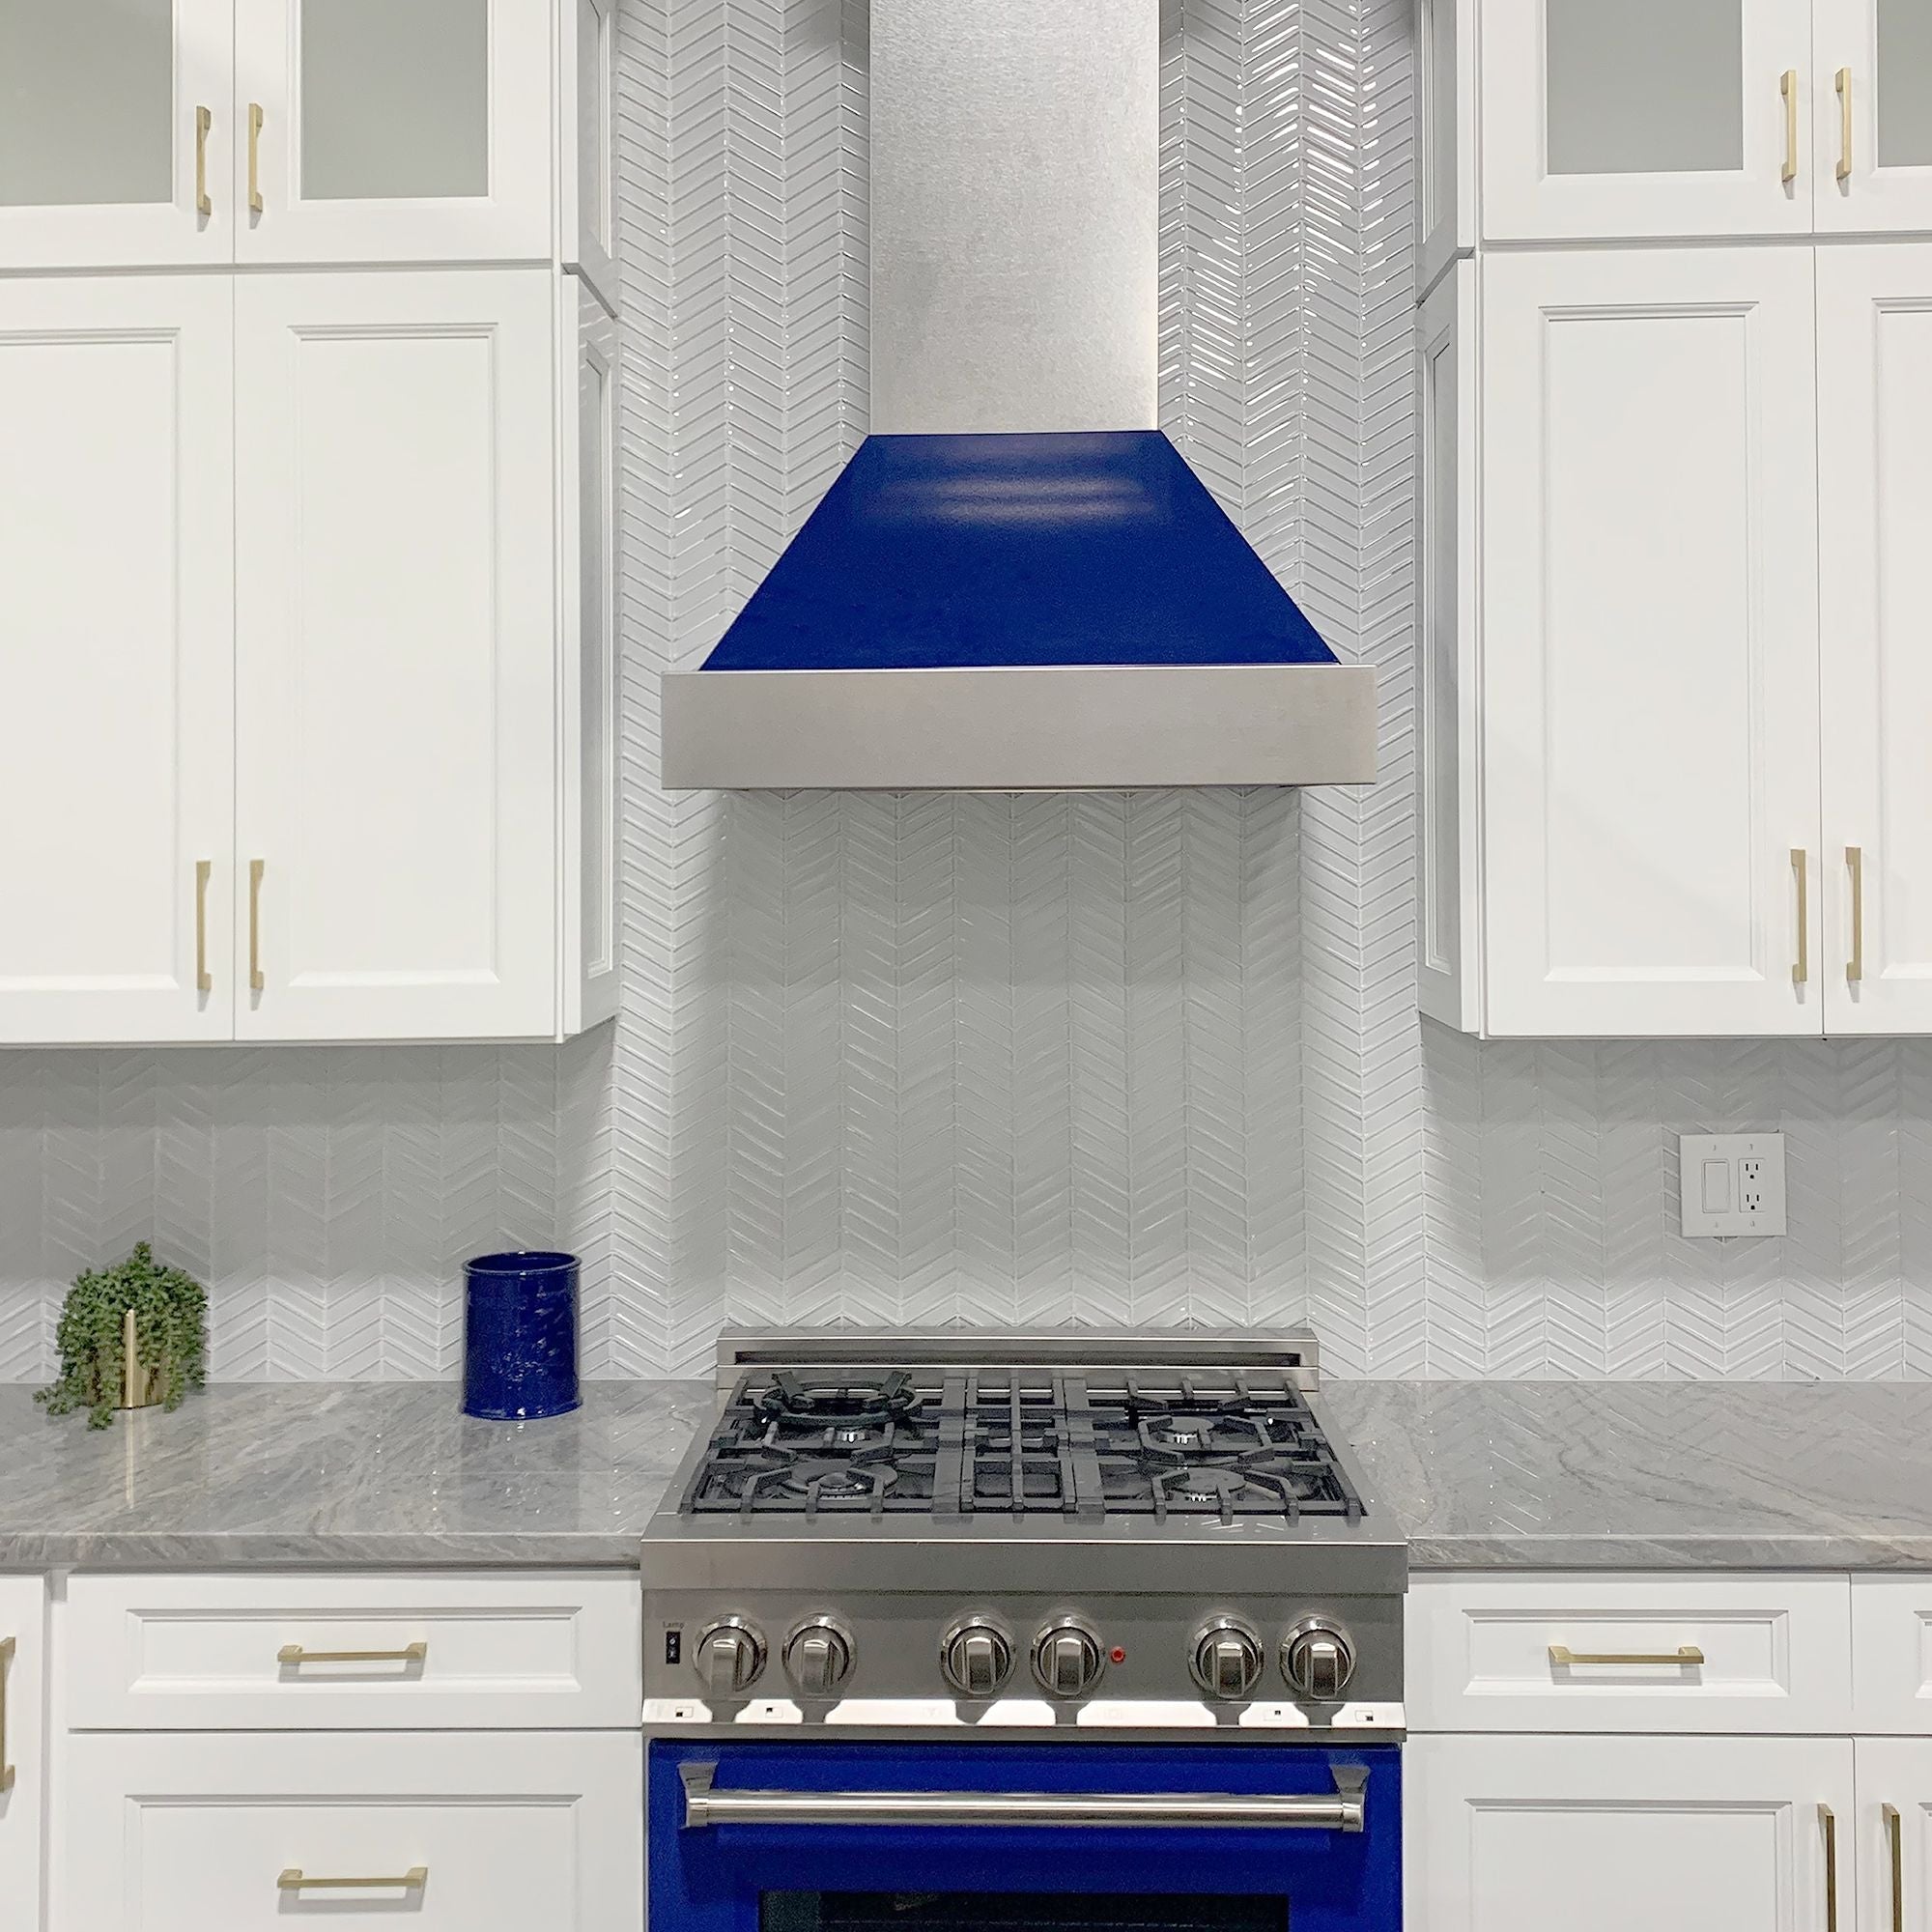 ZLINE Ducted Fingerprint Resistant Stainless Steel Range Hood with Blue Gloss Shell (8654BG) with matching blue gloss range in a white cottage-style kitchen close up.